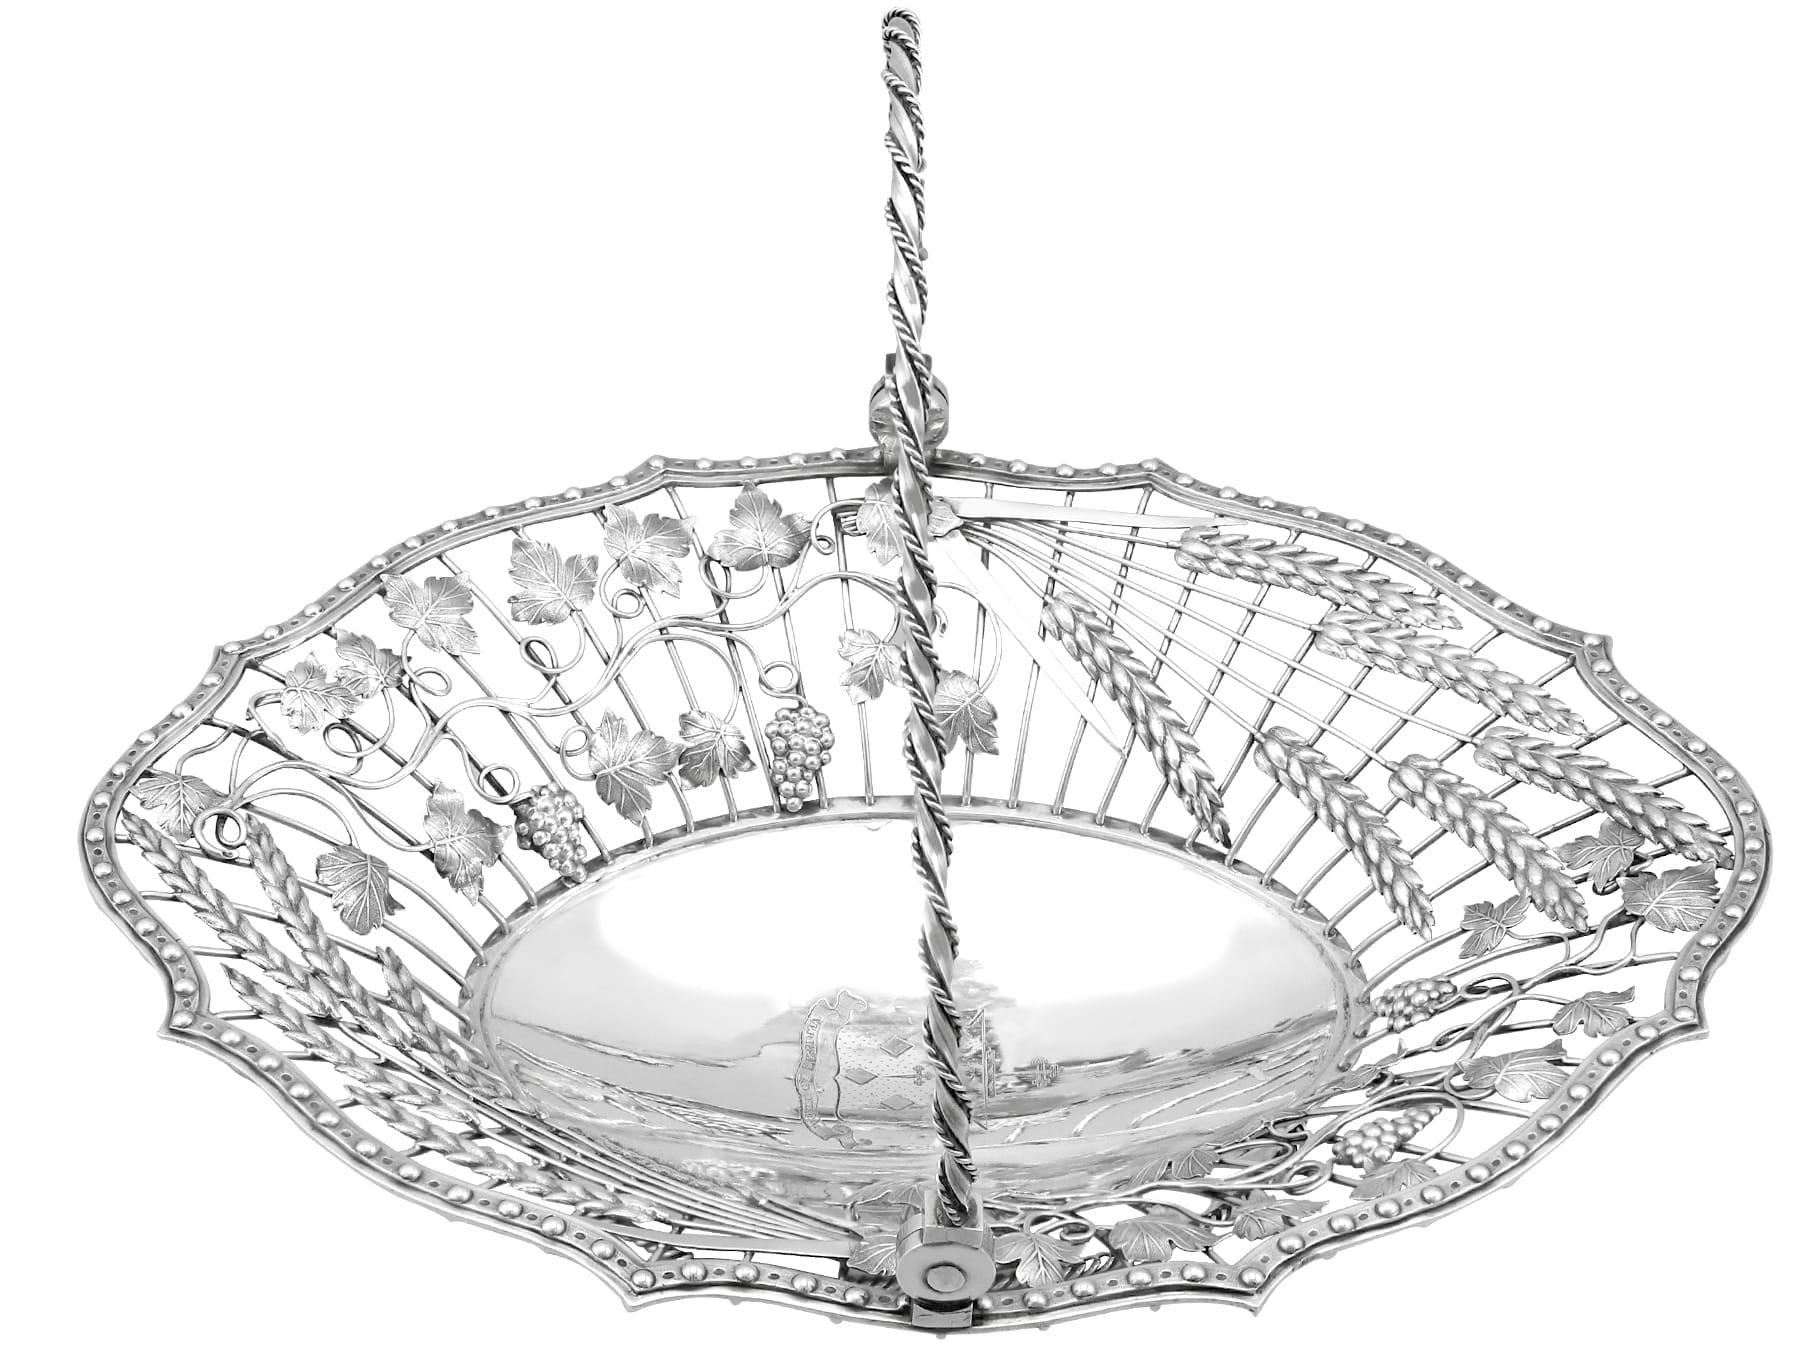 A magnificent, fine and impressive antique Georgian English sterling silver cake/fruit basket; an addition to our silver basket collection

This magnificent, fine and impressive antique George III sterling silver cake/fruit basket has an oval shaped